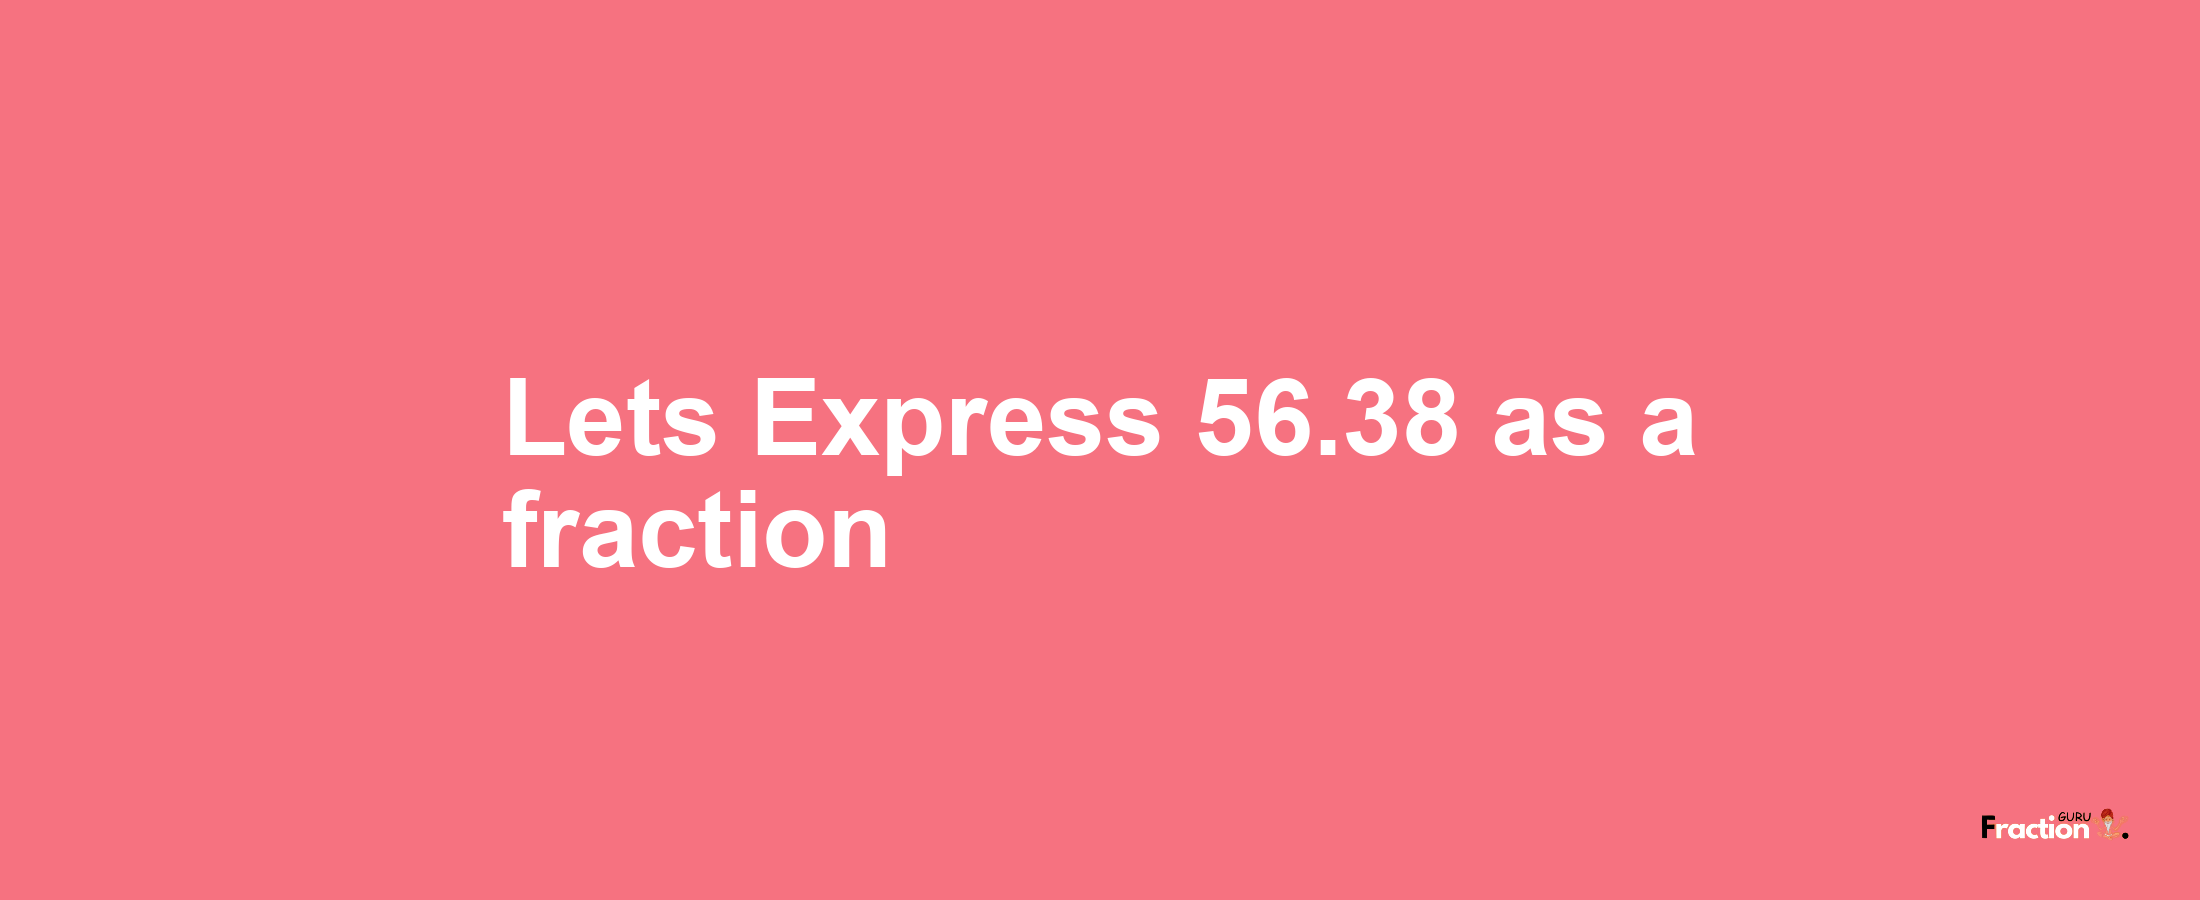 Lets Express 56.38 as afraction